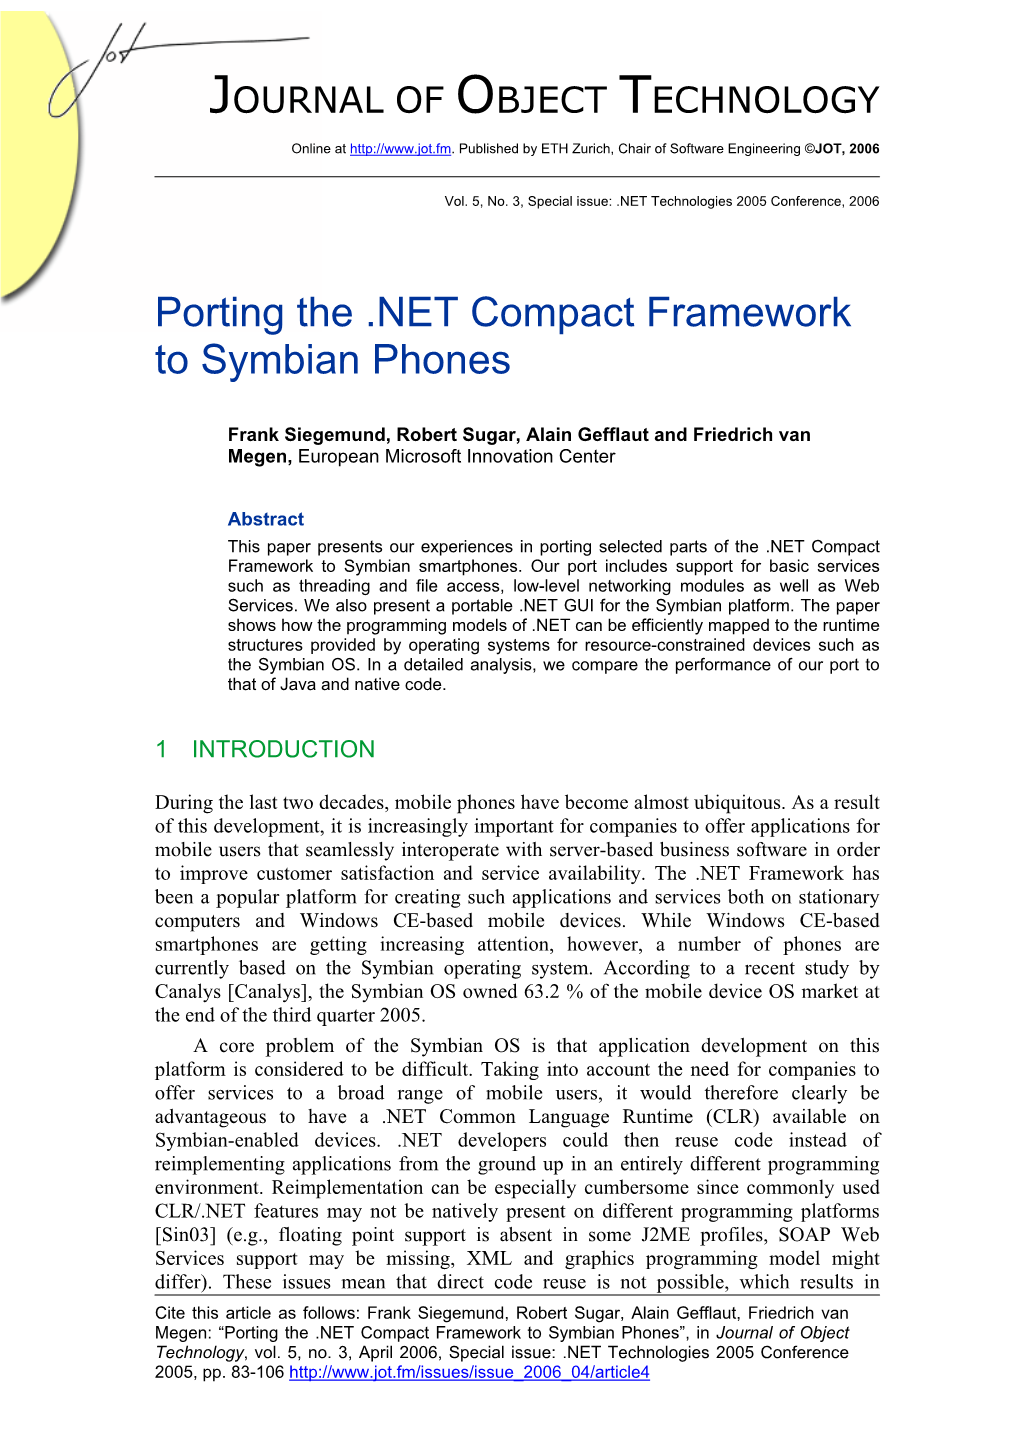 Porting the .NET Compact Framework to Symbian Phones